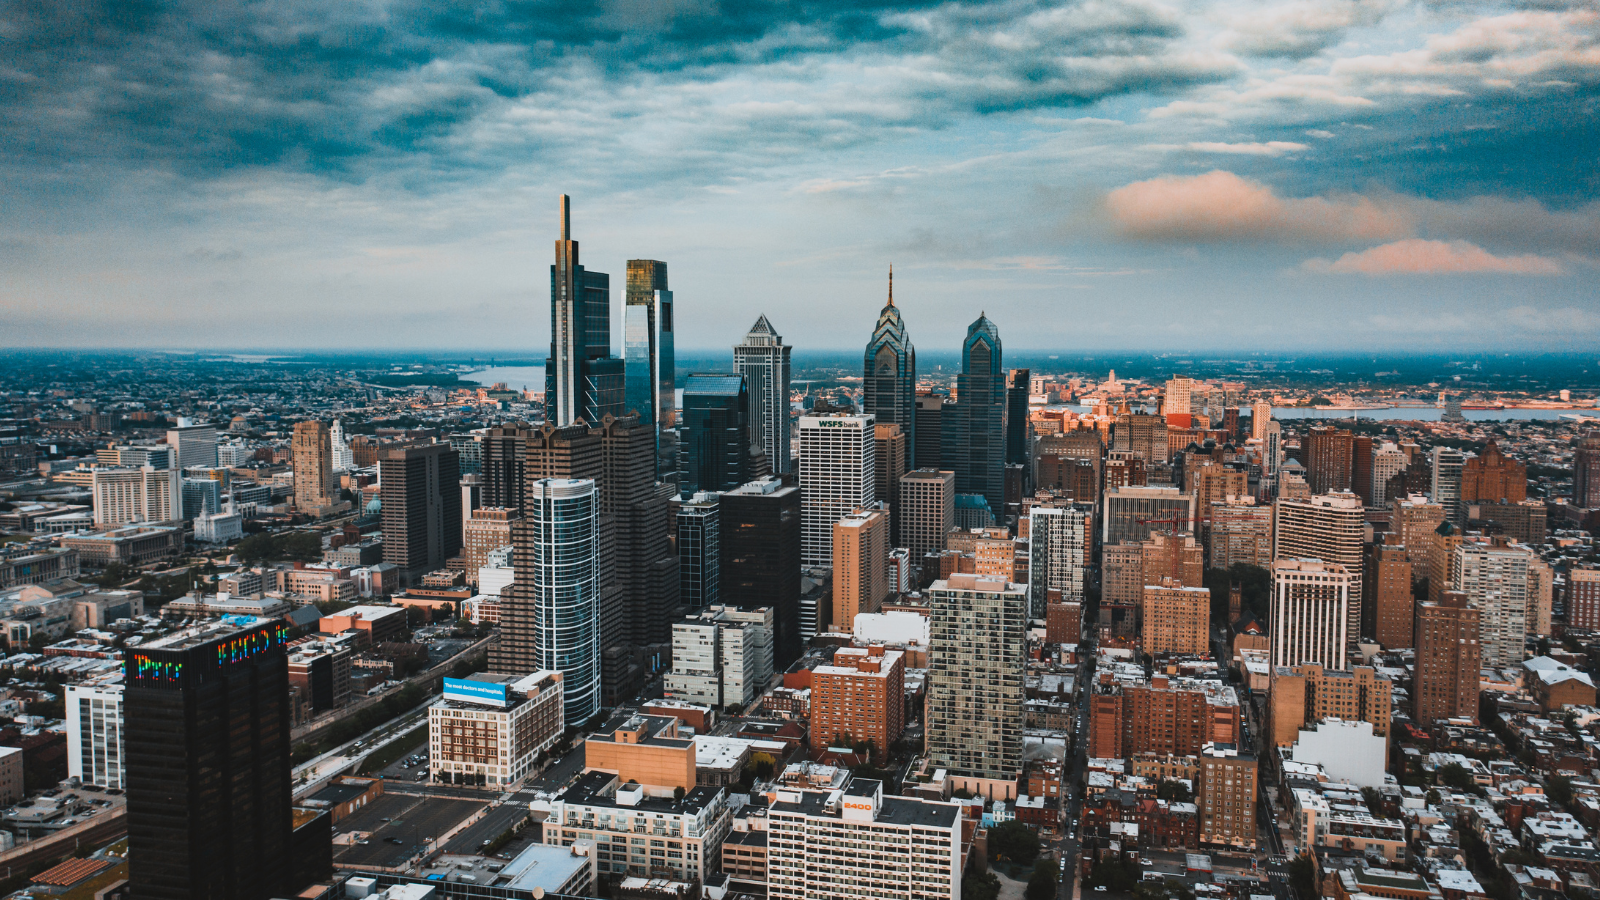 Explore the exciting and historic city of Philadelphia.